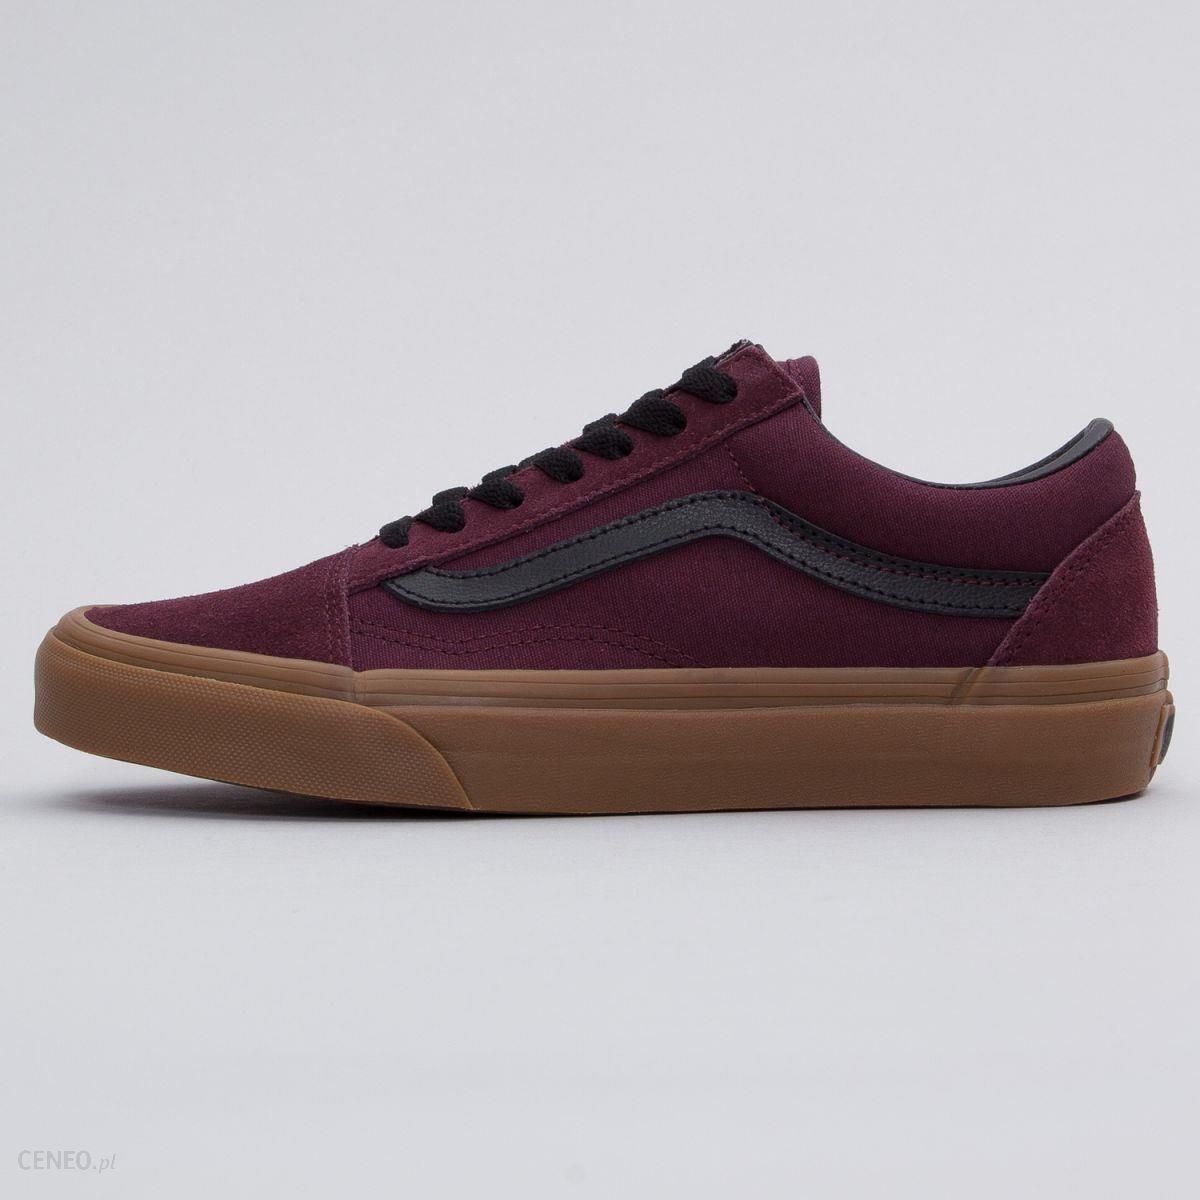 suede gum outsole old skool shoes